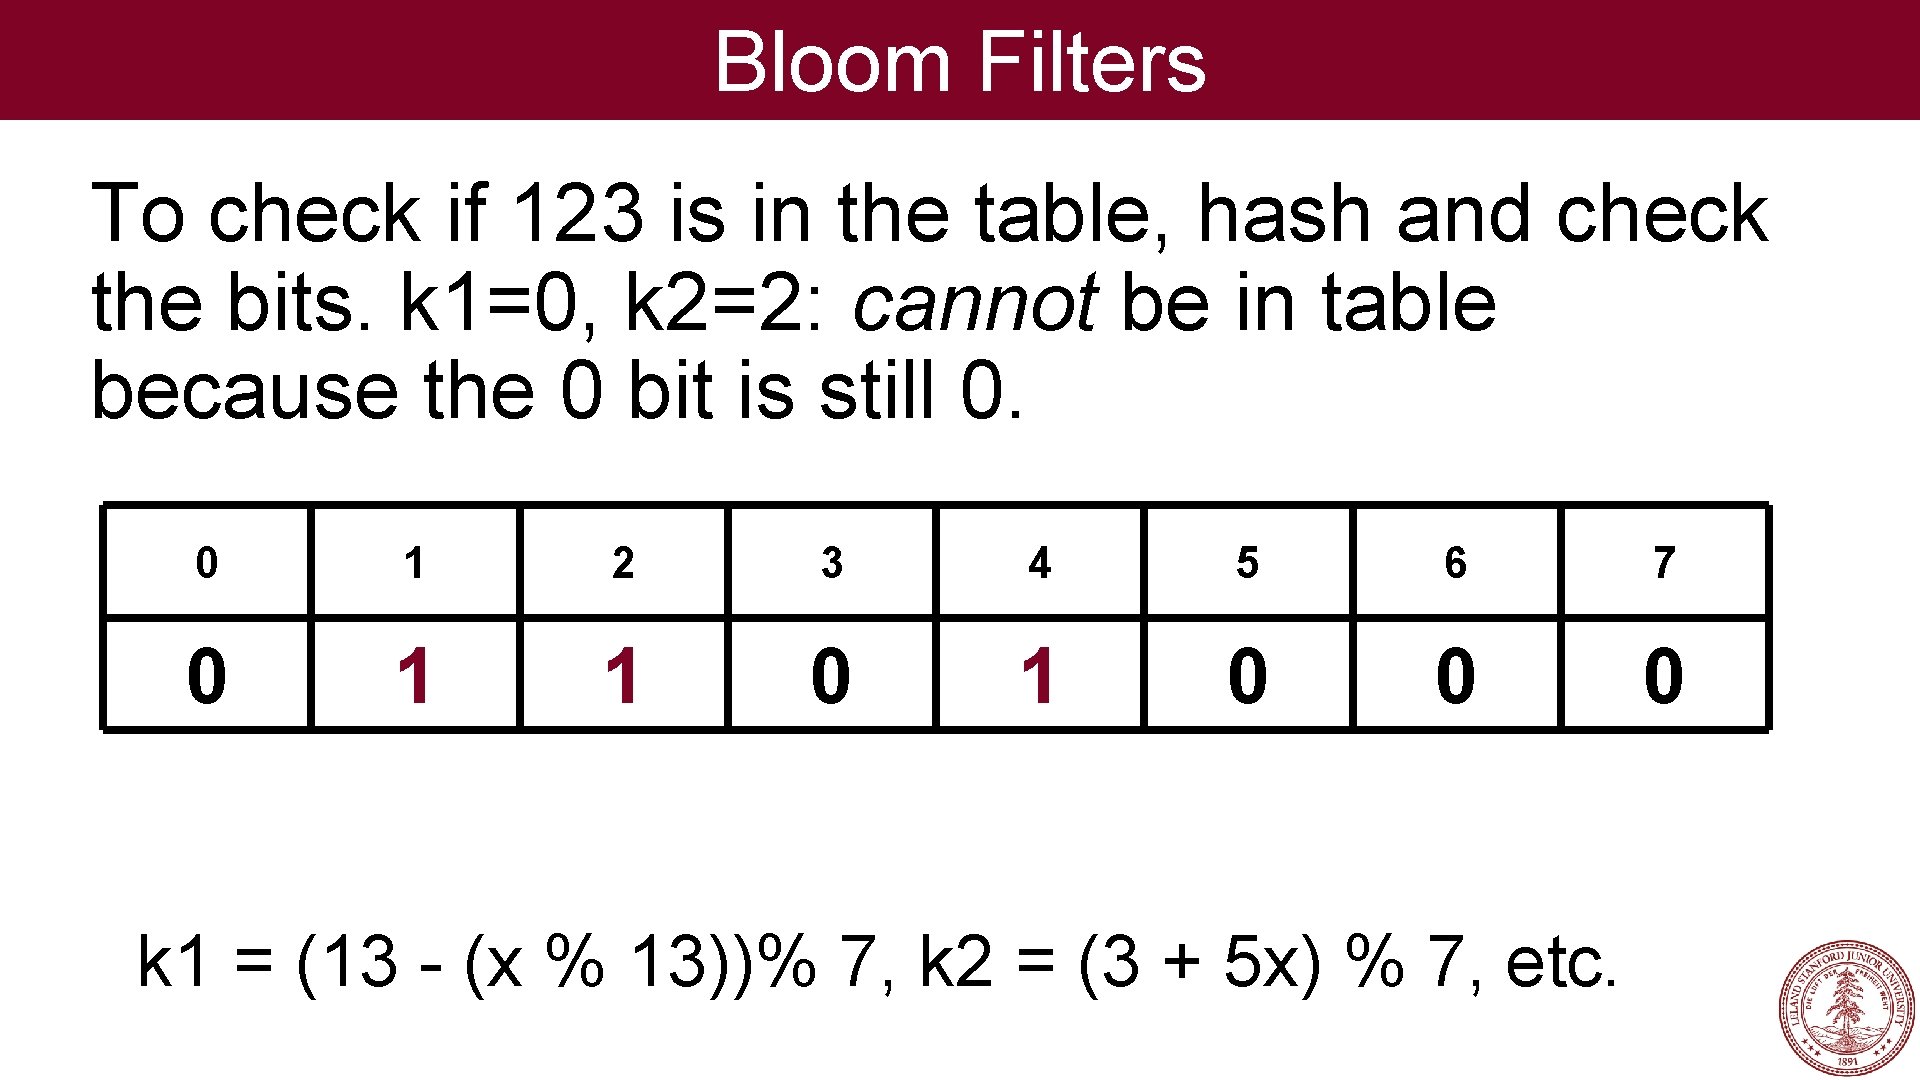 Bloom Filters To check if 123 is in the table, hash and check the